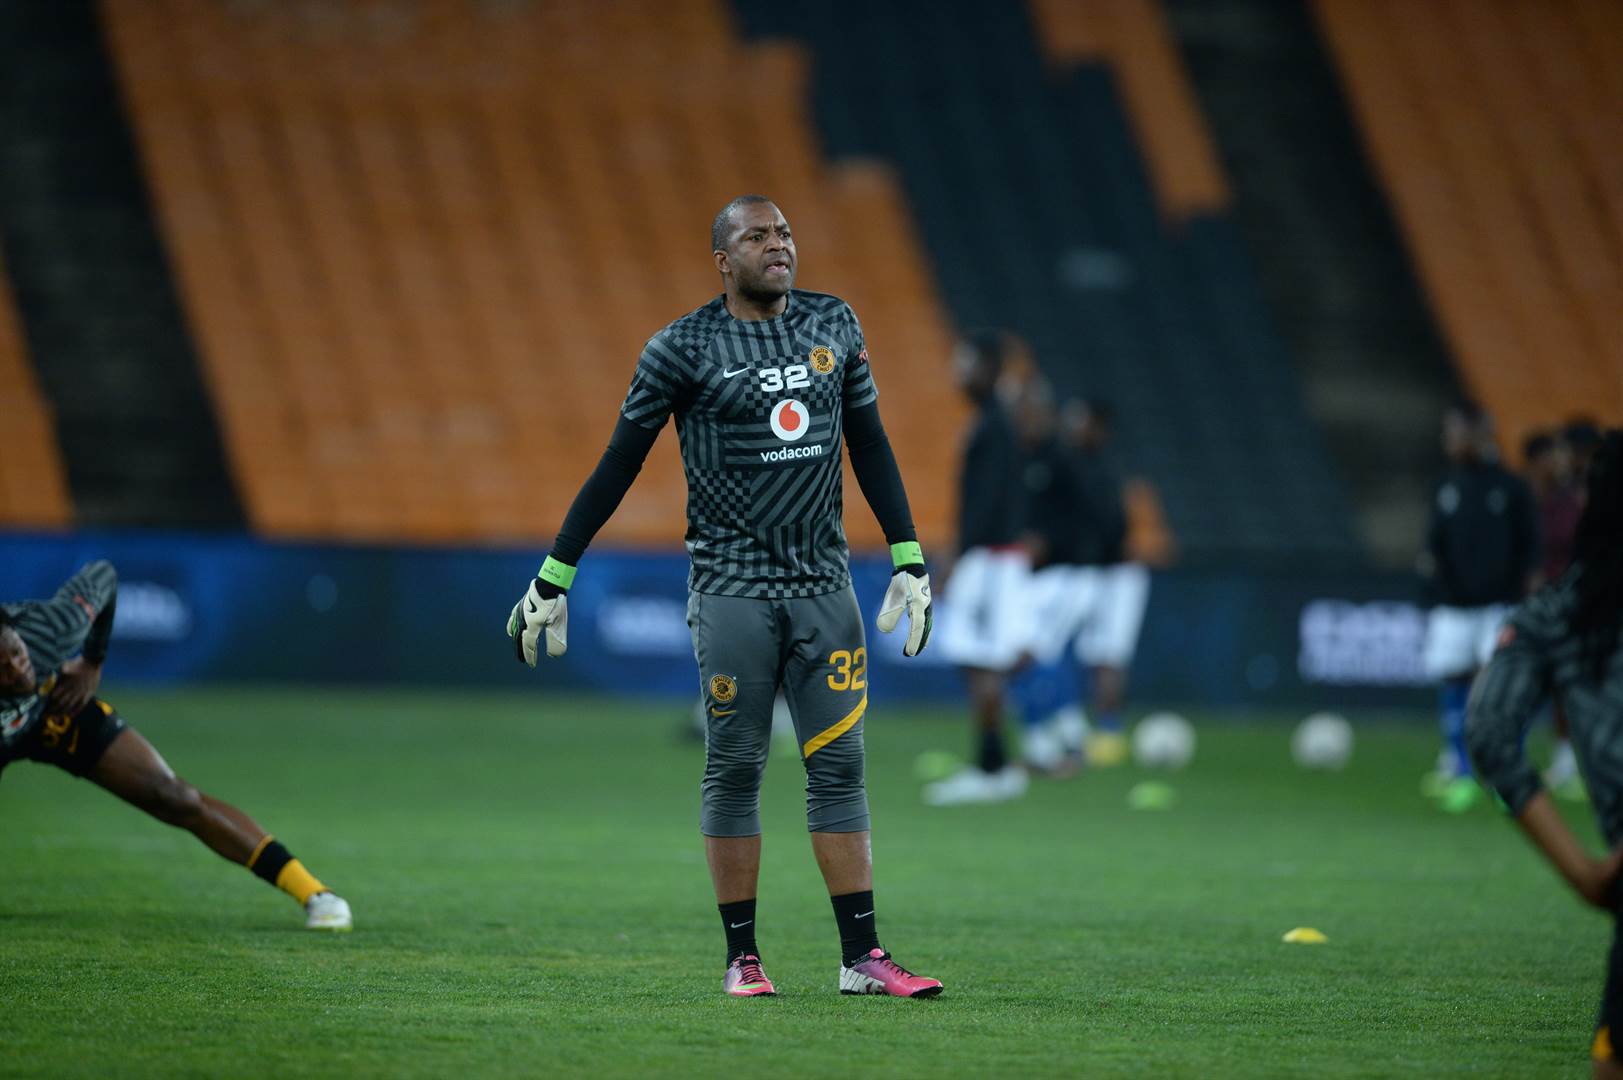 Itumeleng Khune. The veteran is still active with 